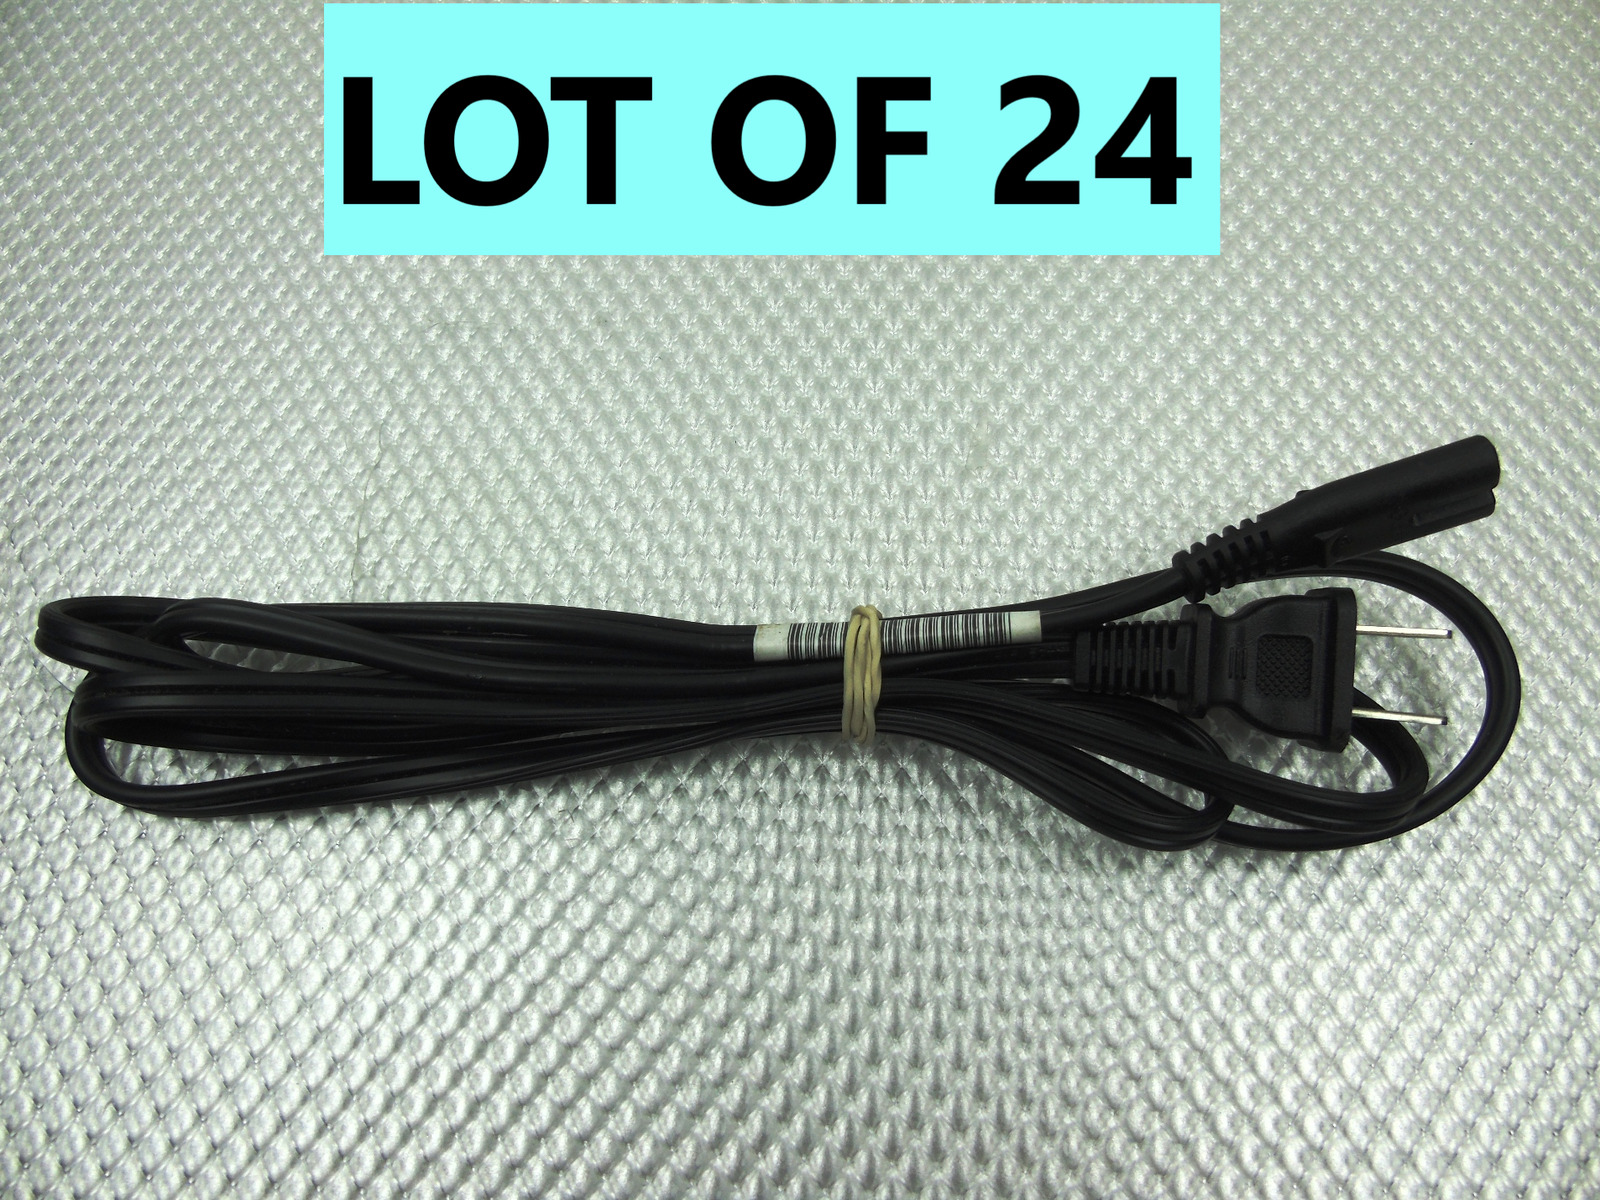 Lot of 24 - 6 Ft 2-prong AC Cable Power Cord for Laptops & Printer Adapters 125V